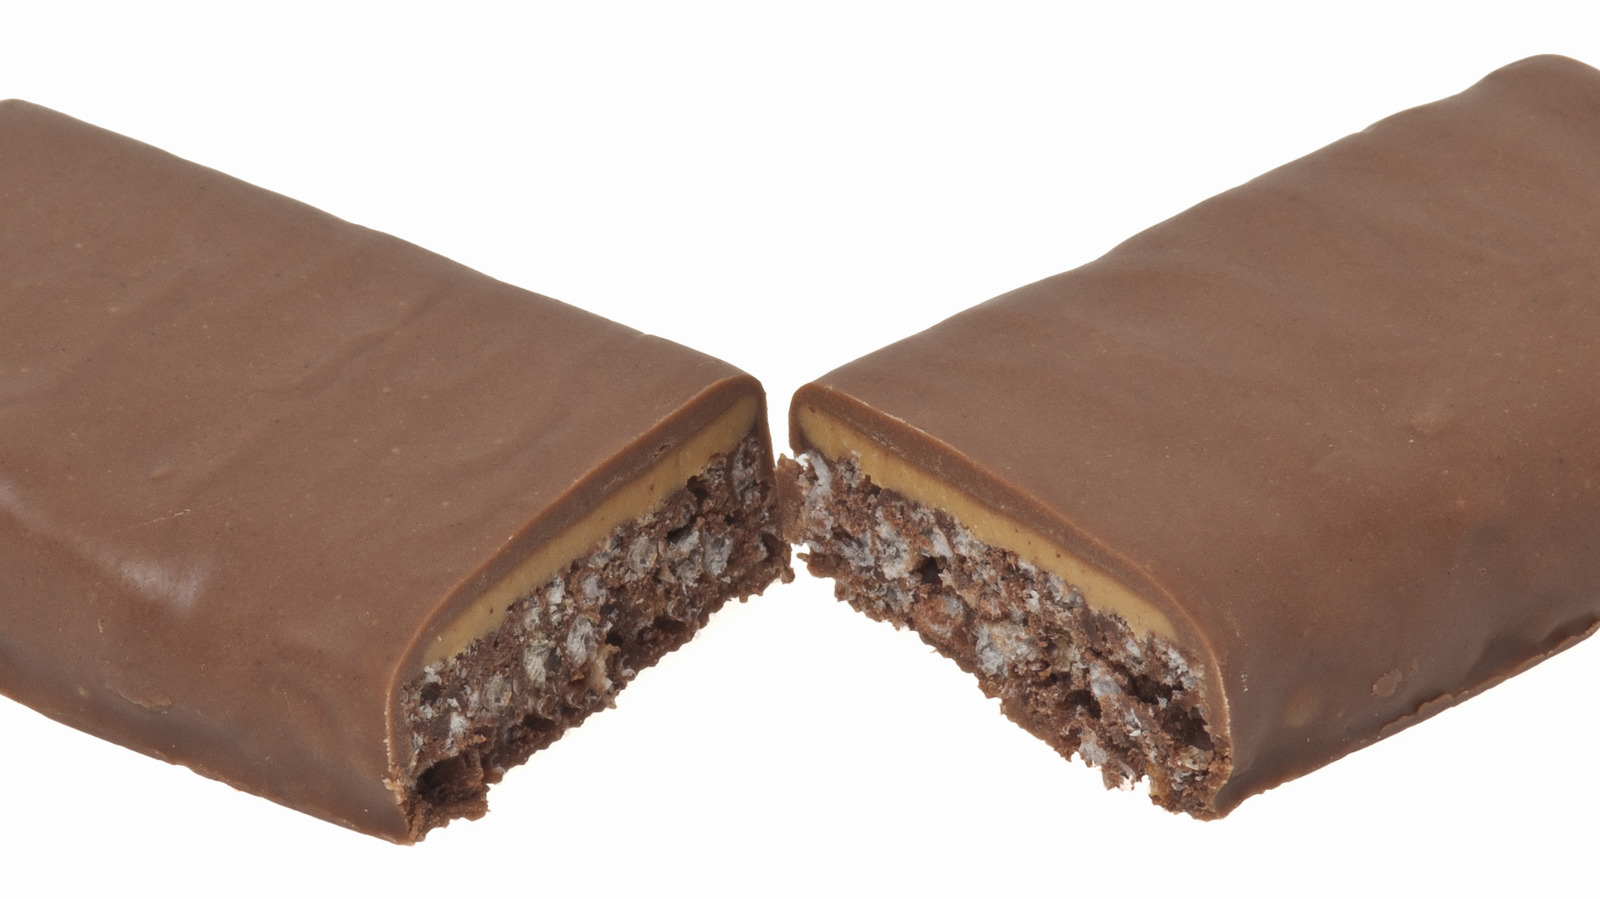 Hershey's Whatchamacallit Candy Bar